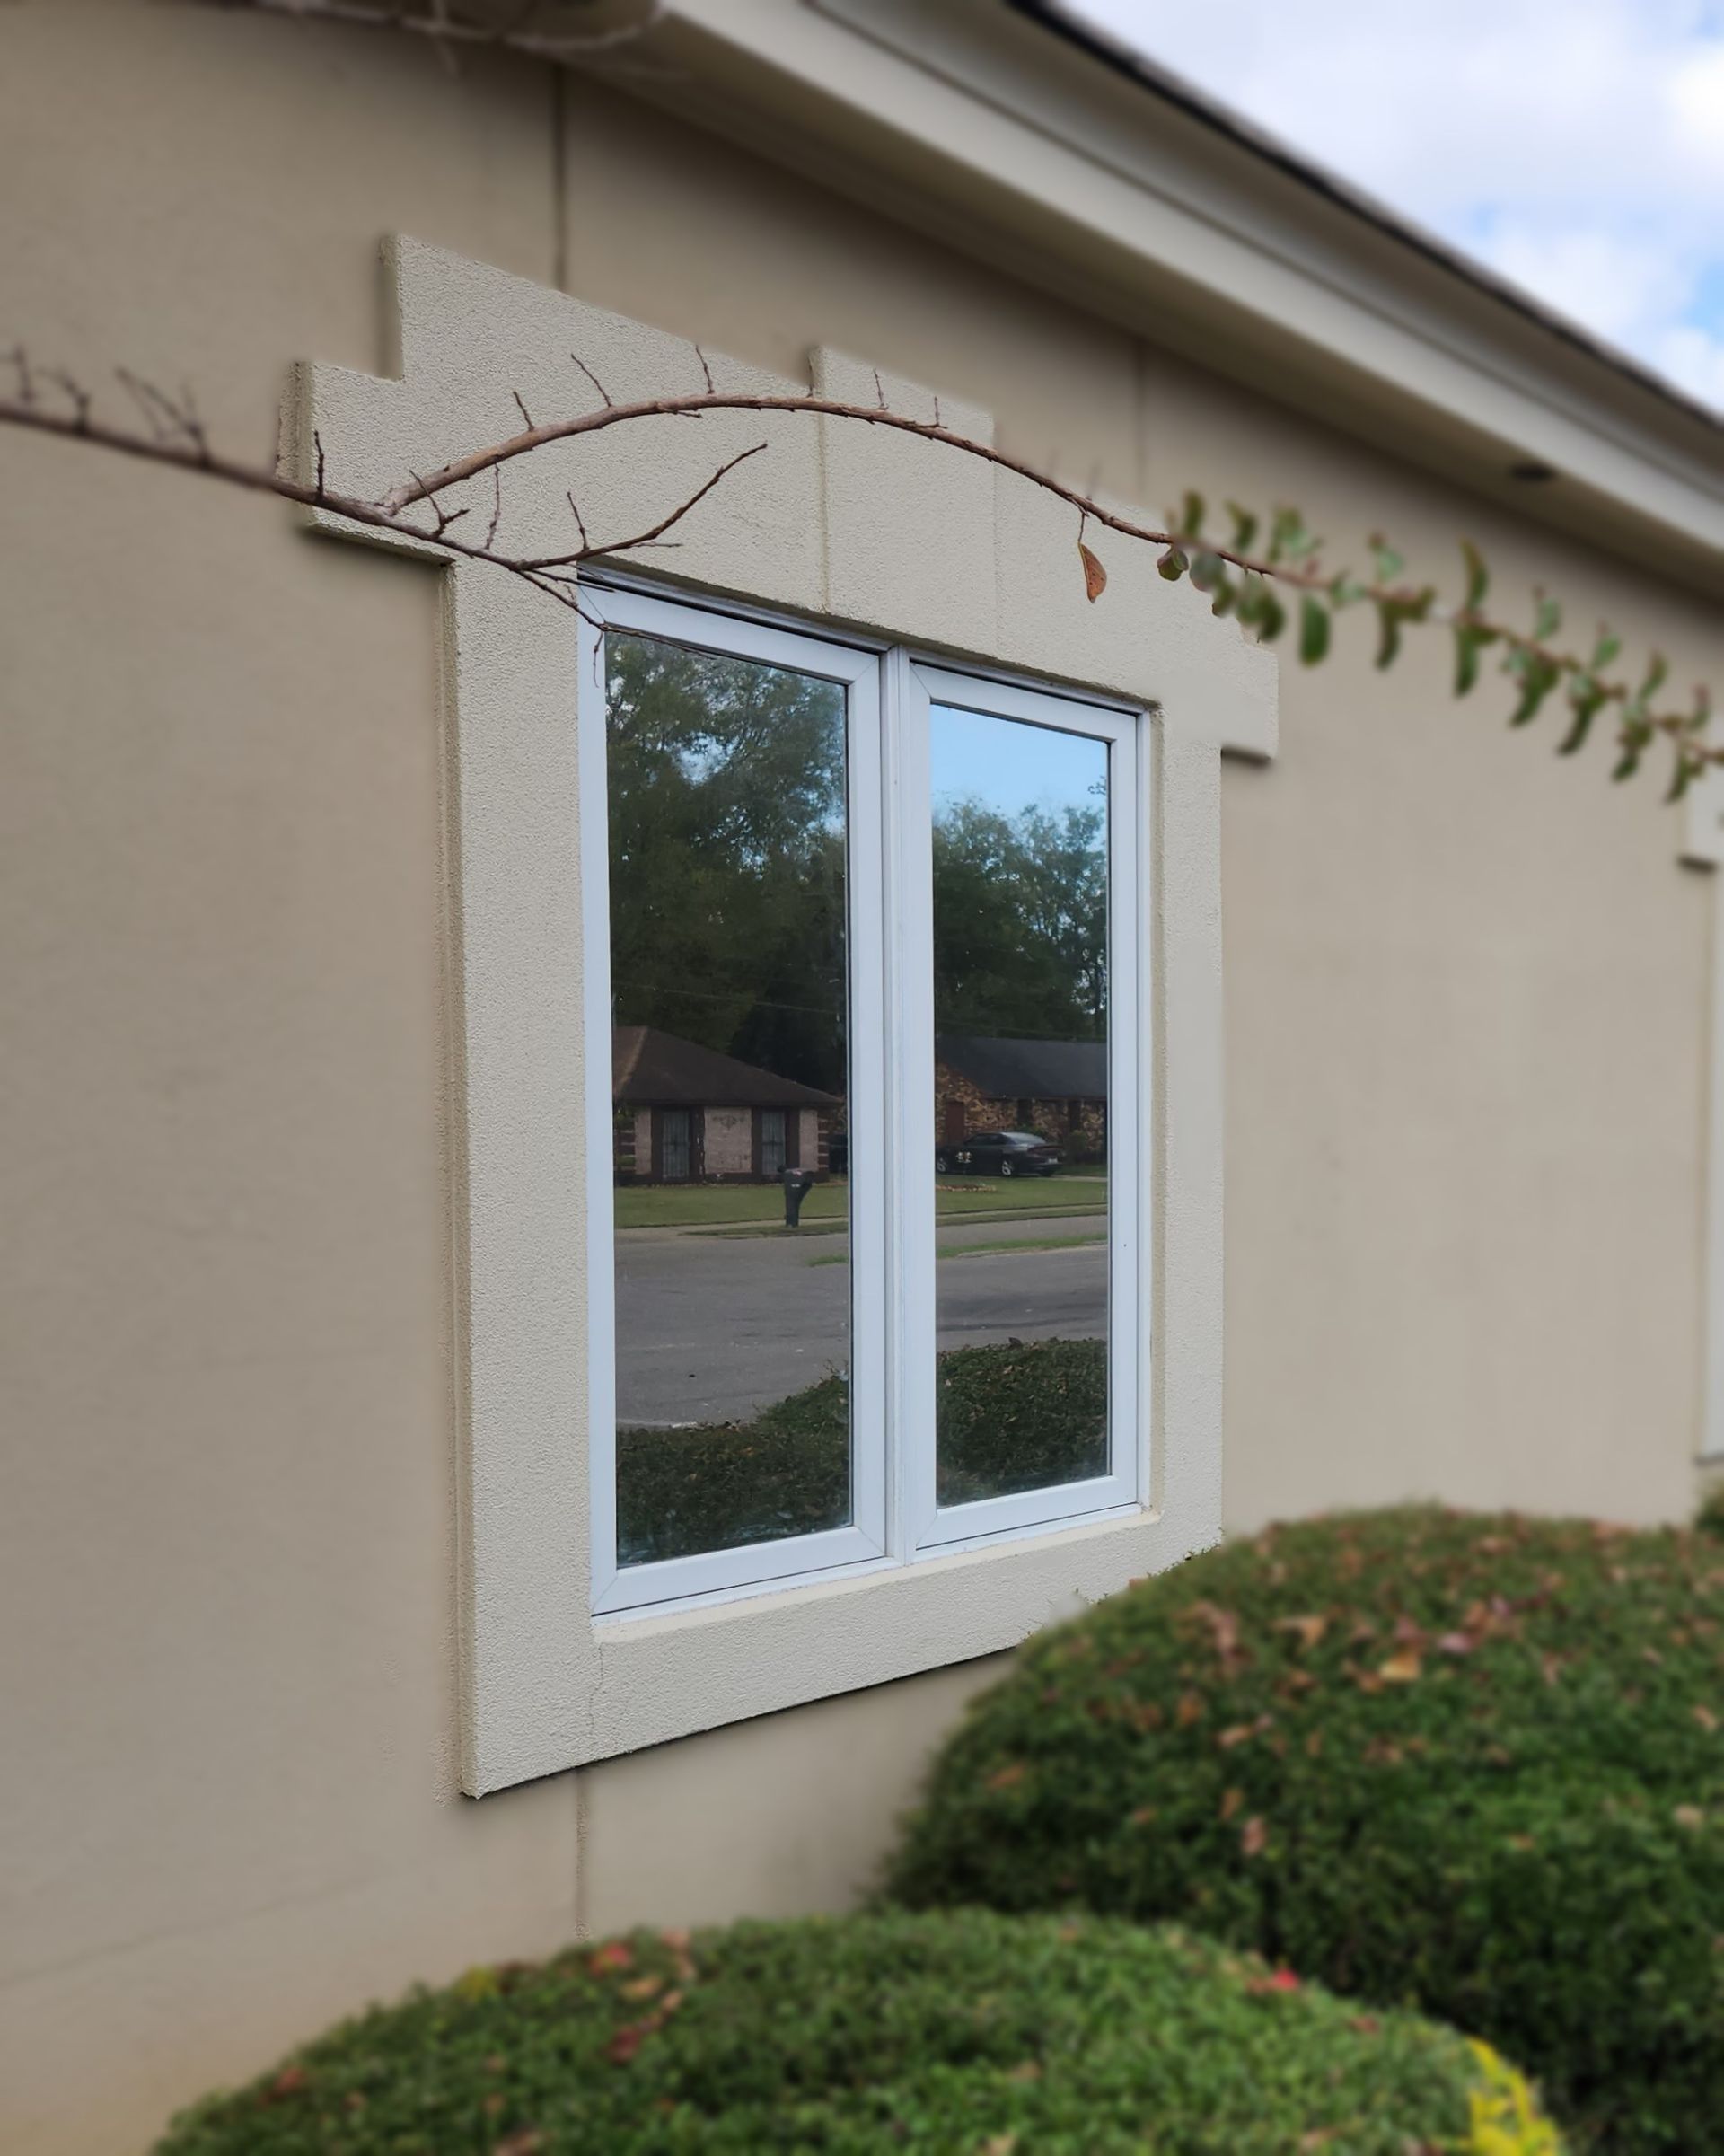 window privacy - SPF Performance Ultra tint adds top power savings and comfort inside the daycare. Montgomery Alabama